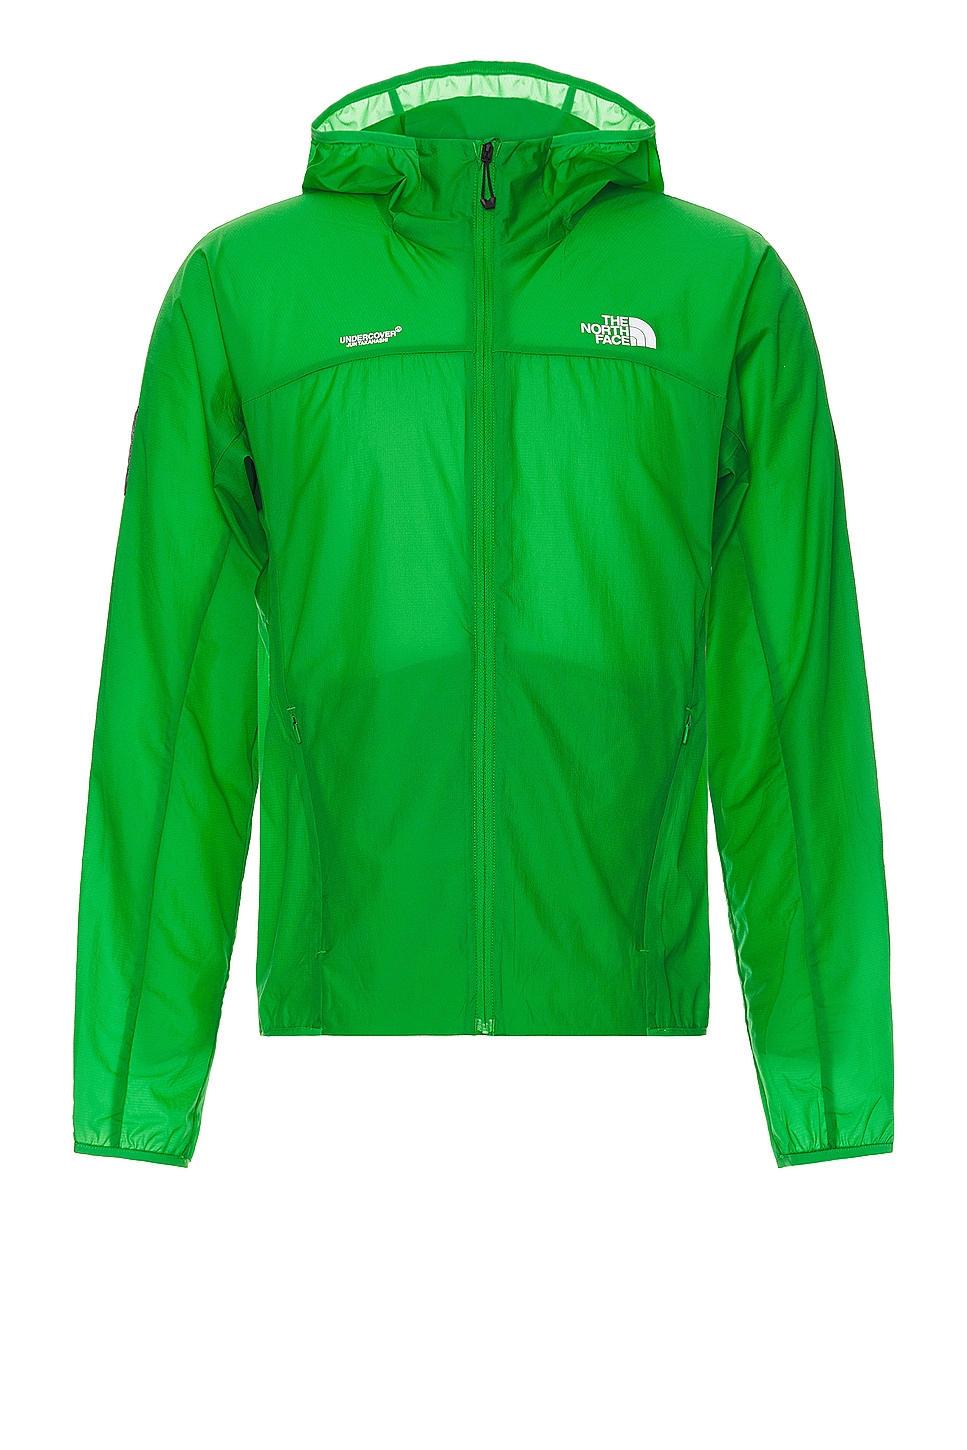 Image 1 of The North Face Soukuu Trail Run Packable Wind Jacket in Fern Green